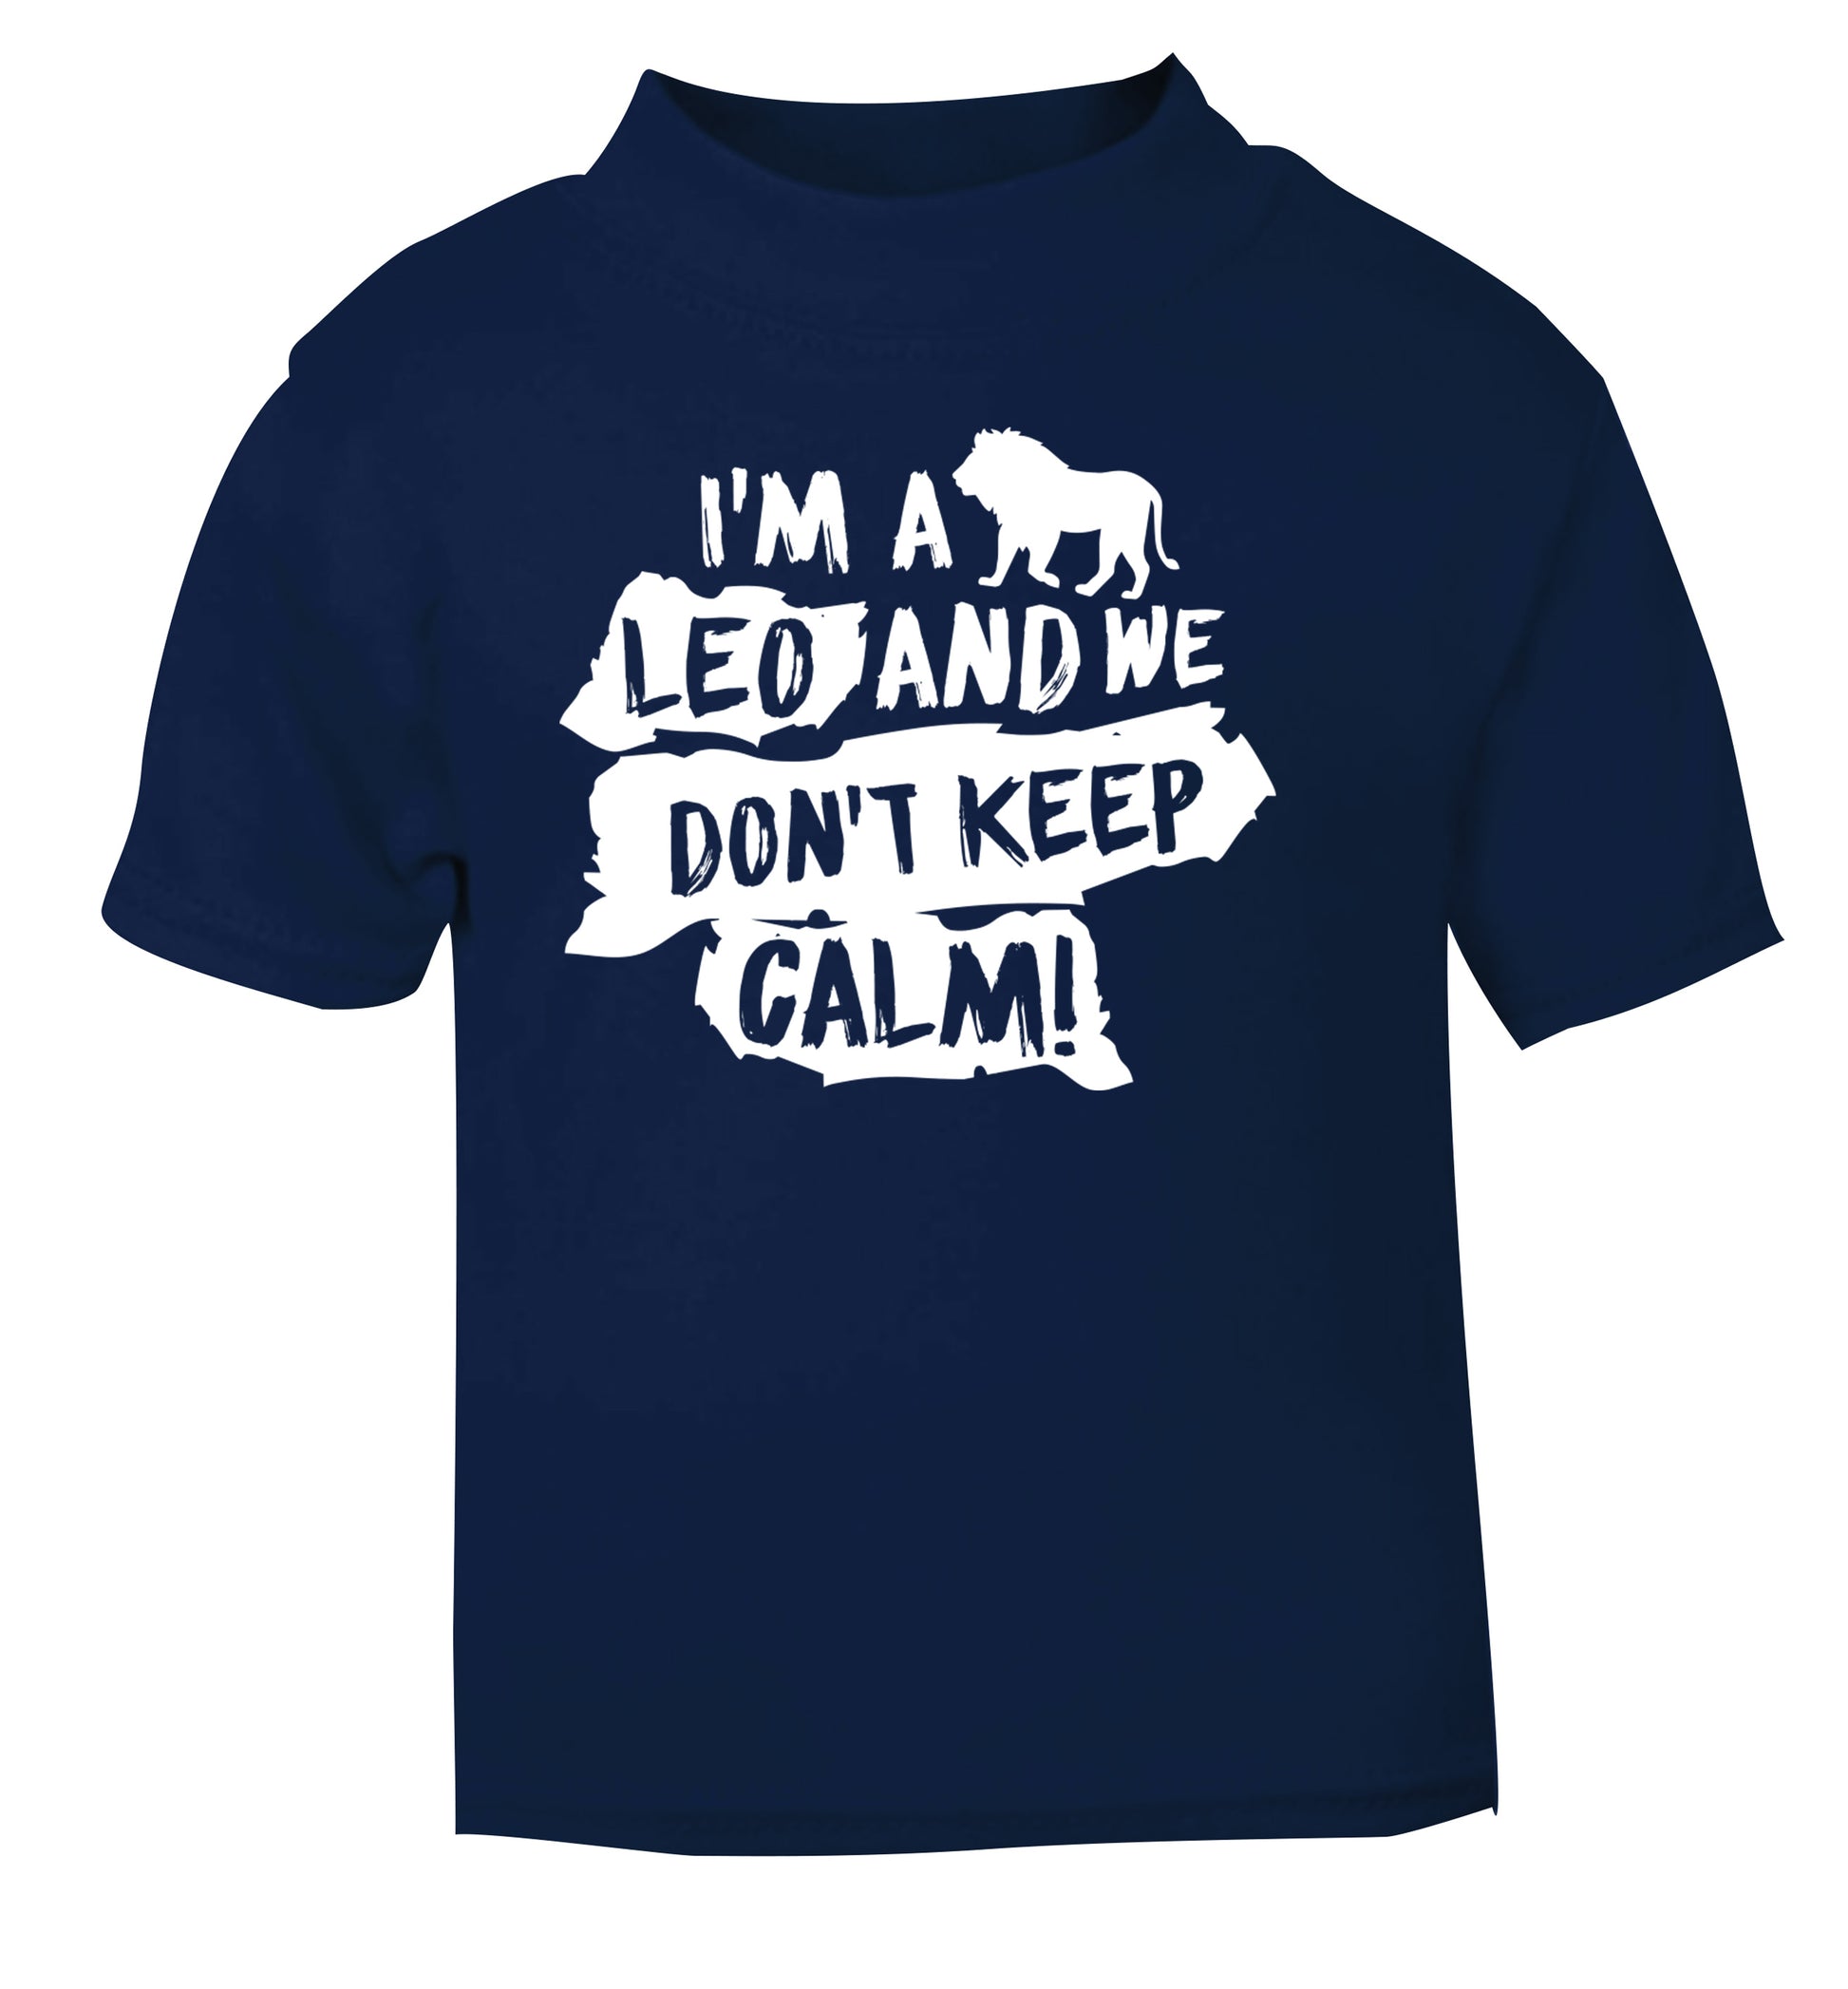 I'm a leo and we don't keep calm! navy Baby Toddler Tshirt 2 Years